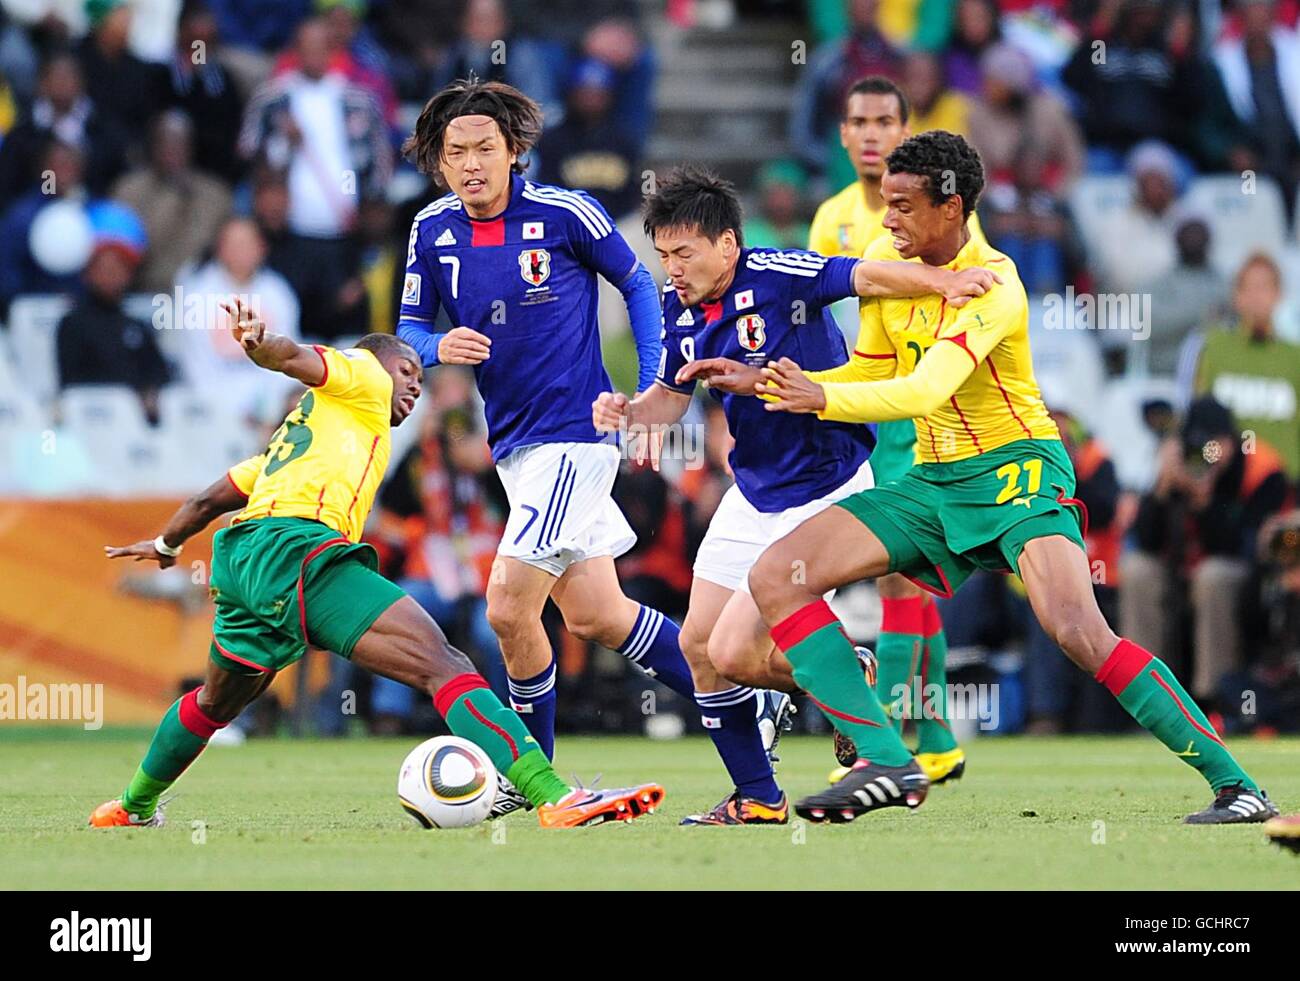 Soccer - 2010 FIFA World Cup South Africa - Group E - Japan v Cameroon - Free State Stadium. Cameroon's Eyong Enoh (left) and Joel Matip (right) in action against Japan's Yuto Nagatomo (centre) Stock Photo